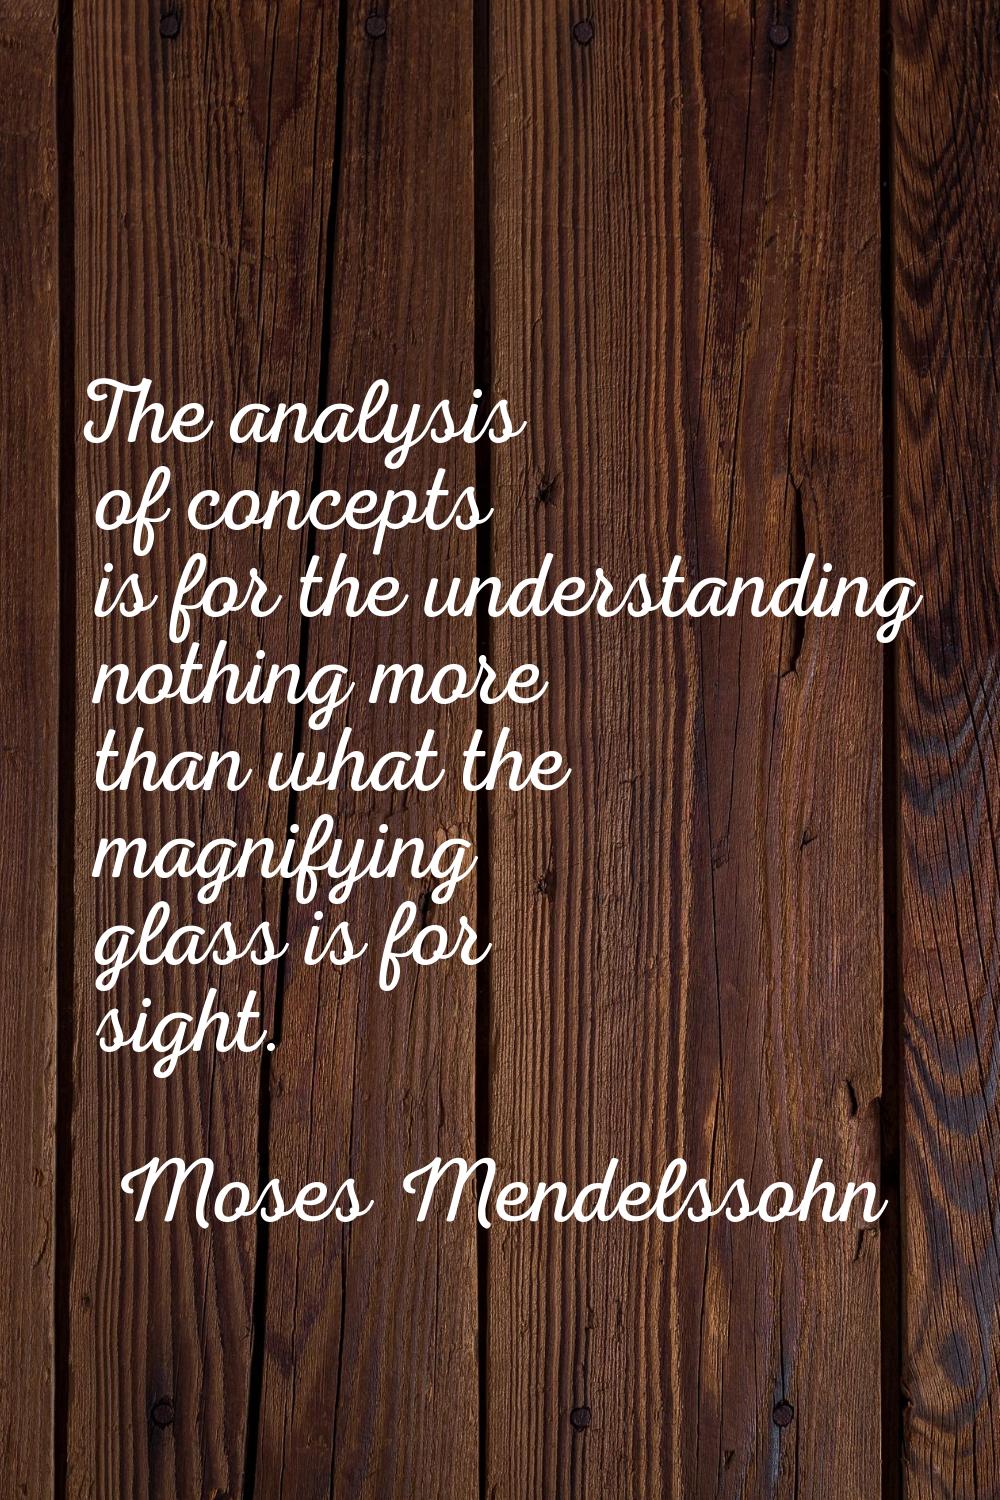 The analysis of concepts is for the understanding nothing more than what the magnifying glass is fo